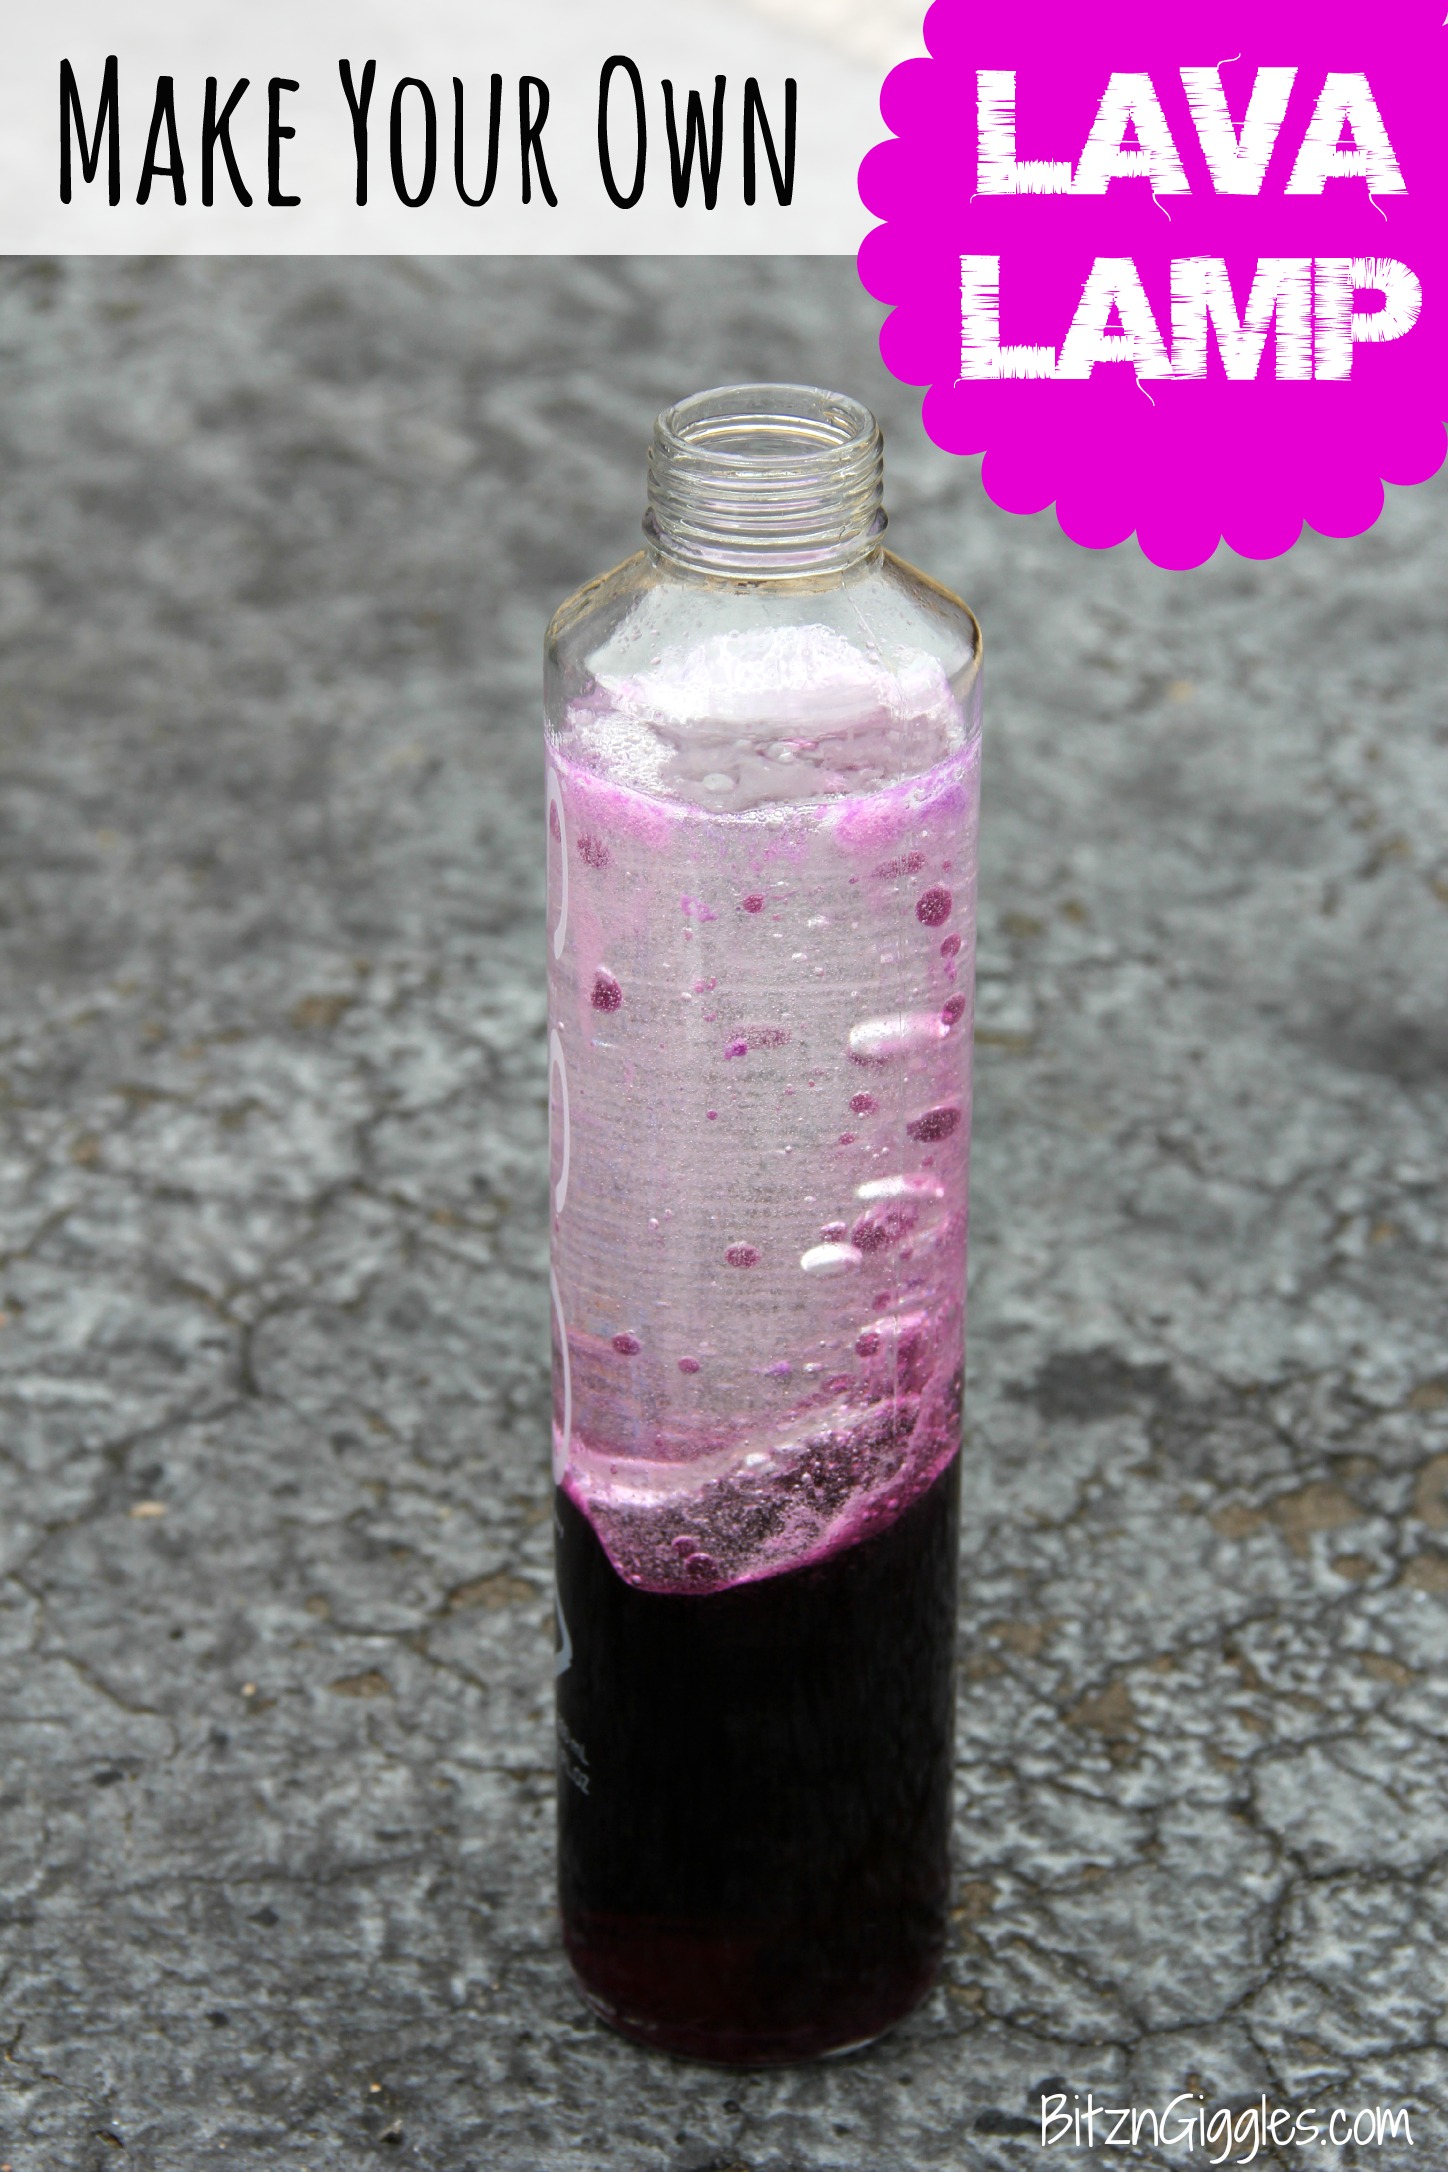 make-your-own-lava-lamp-bitz-giggles